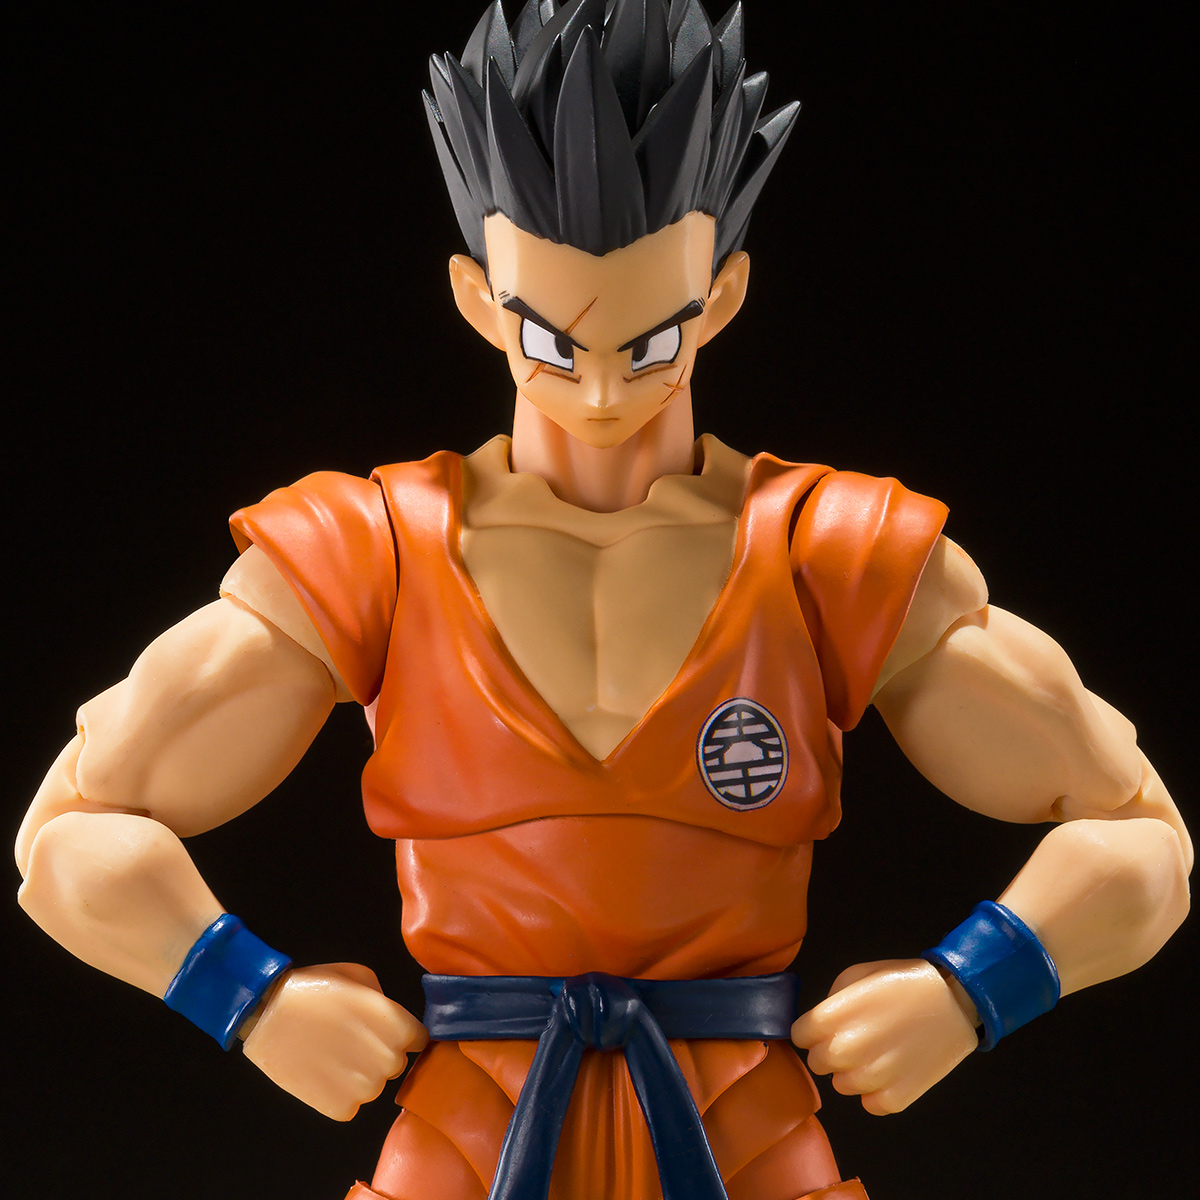 S.H.Figuarts S.H.Figuarts YAMCHA -EARTH'S FOREMOST FIGHTER- from #DragonBall will be available for pre-order on 6/16 at 3:00 AM EDT on Premium Bandai. 
Check out the details at the link below. 

- S.H.Figuarts YAMCHA -EARTH'S FOREMOST FIGHTER-

ow.ly/MsaN50OOOOH